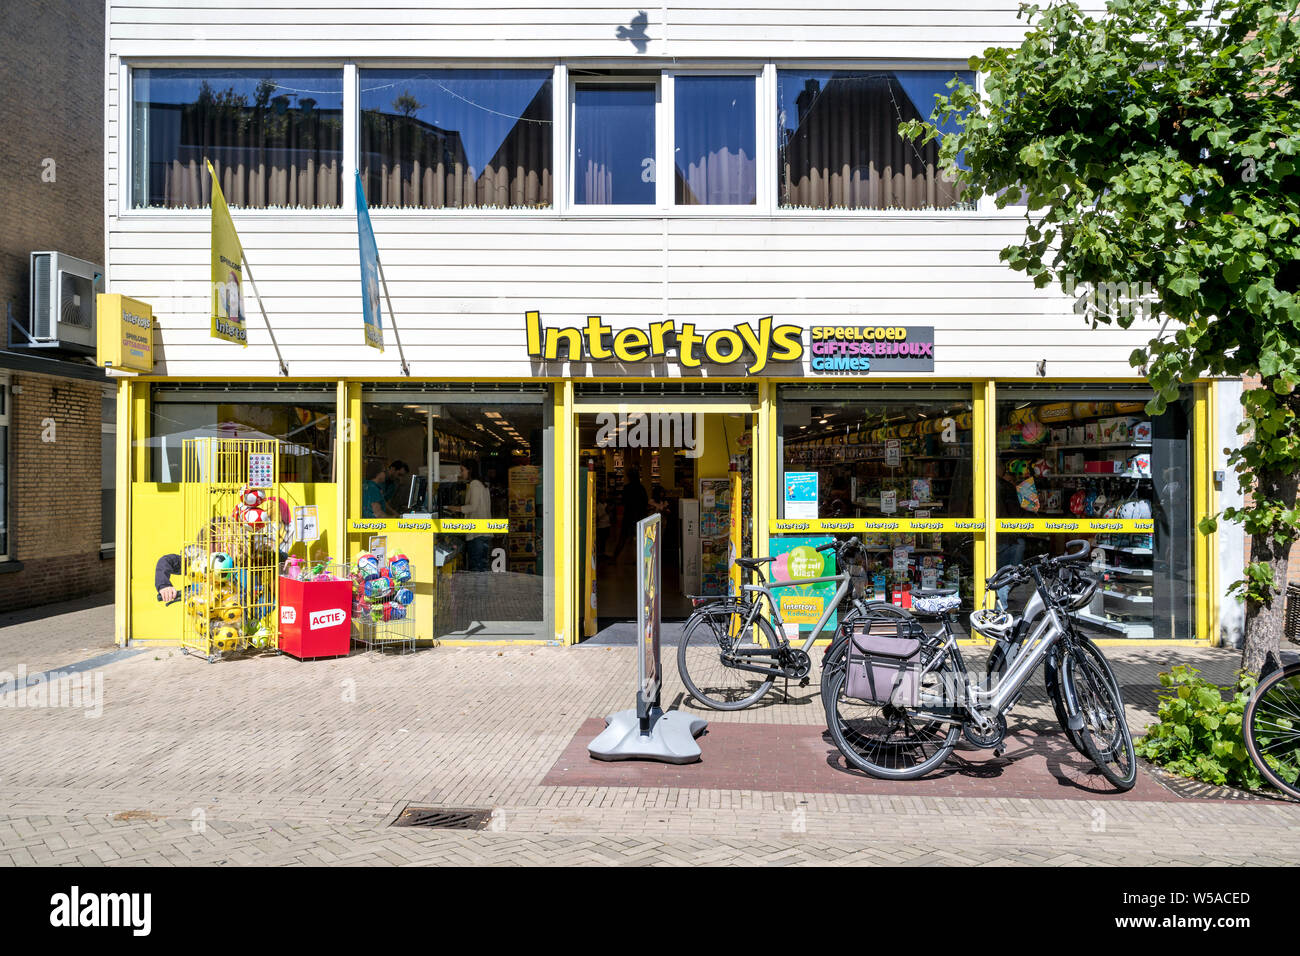 Intertoys store in Wassenaar, The Netherlands. Intertoys is Dutch toys, multimedia and electronics retailer. It is headquartered in Amsterdam Stock Photo - Alamy